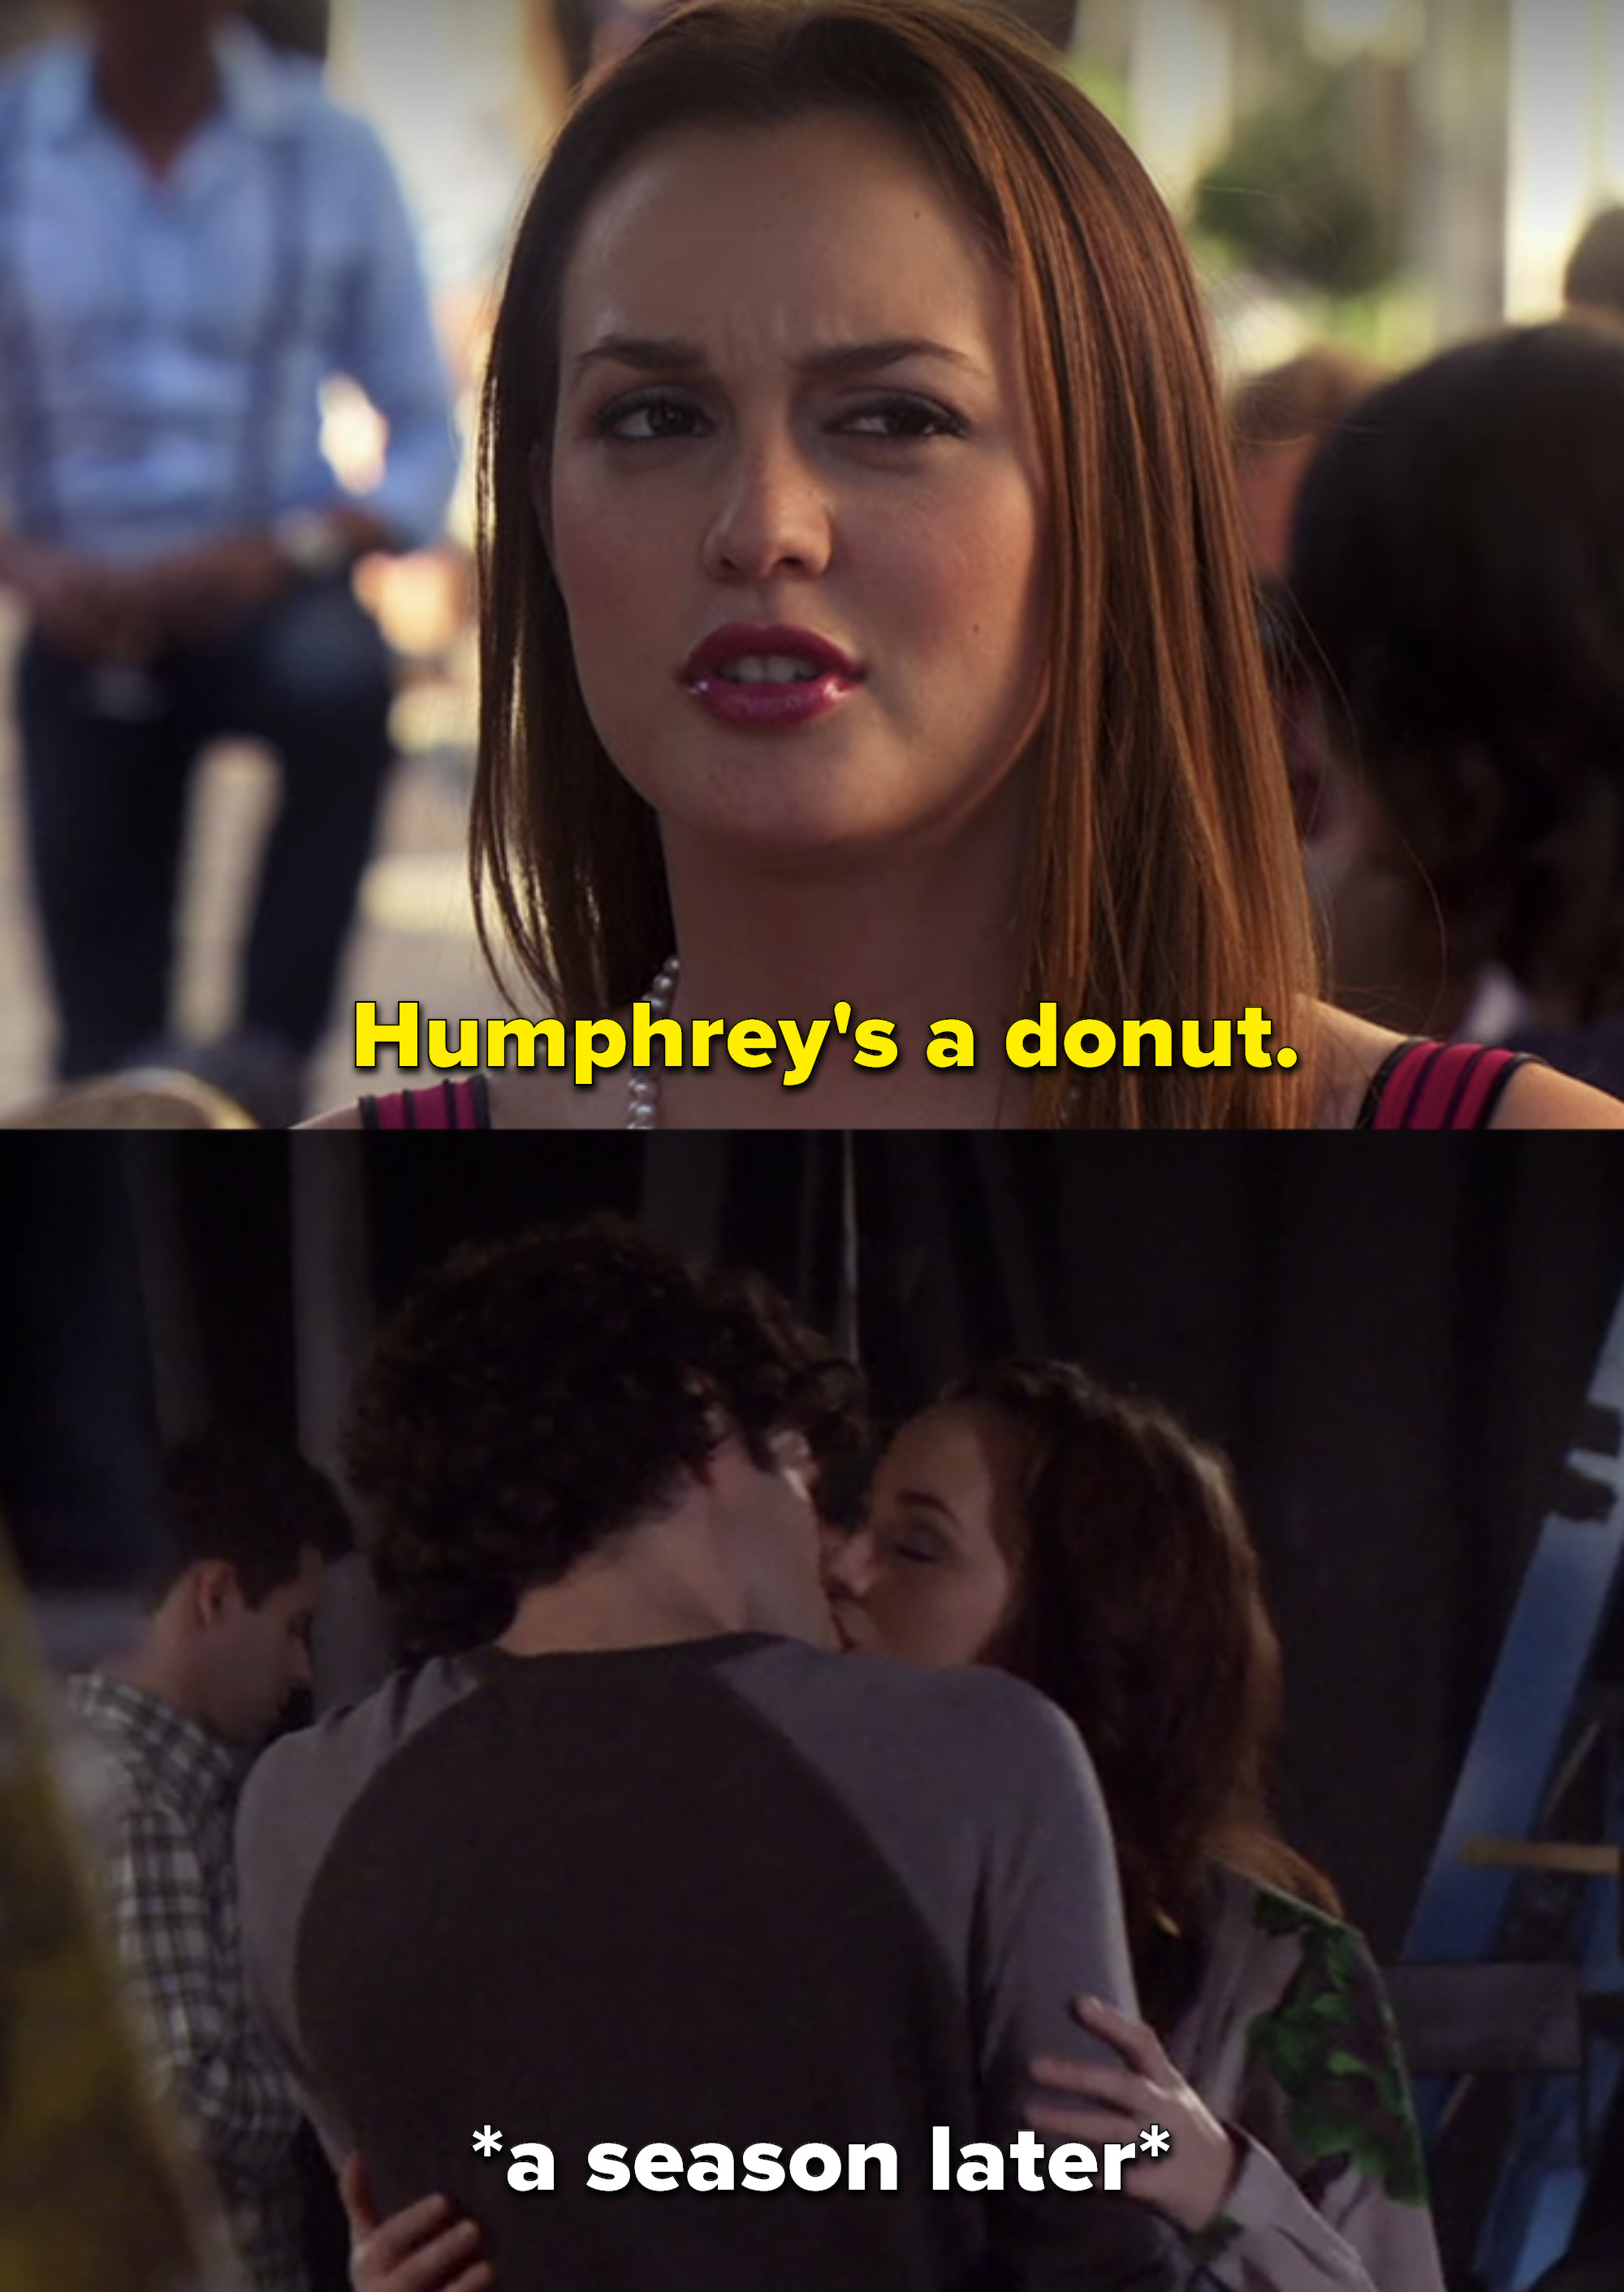 Blair calls Humphrey a donut, then a season later they&#x27;re kissing